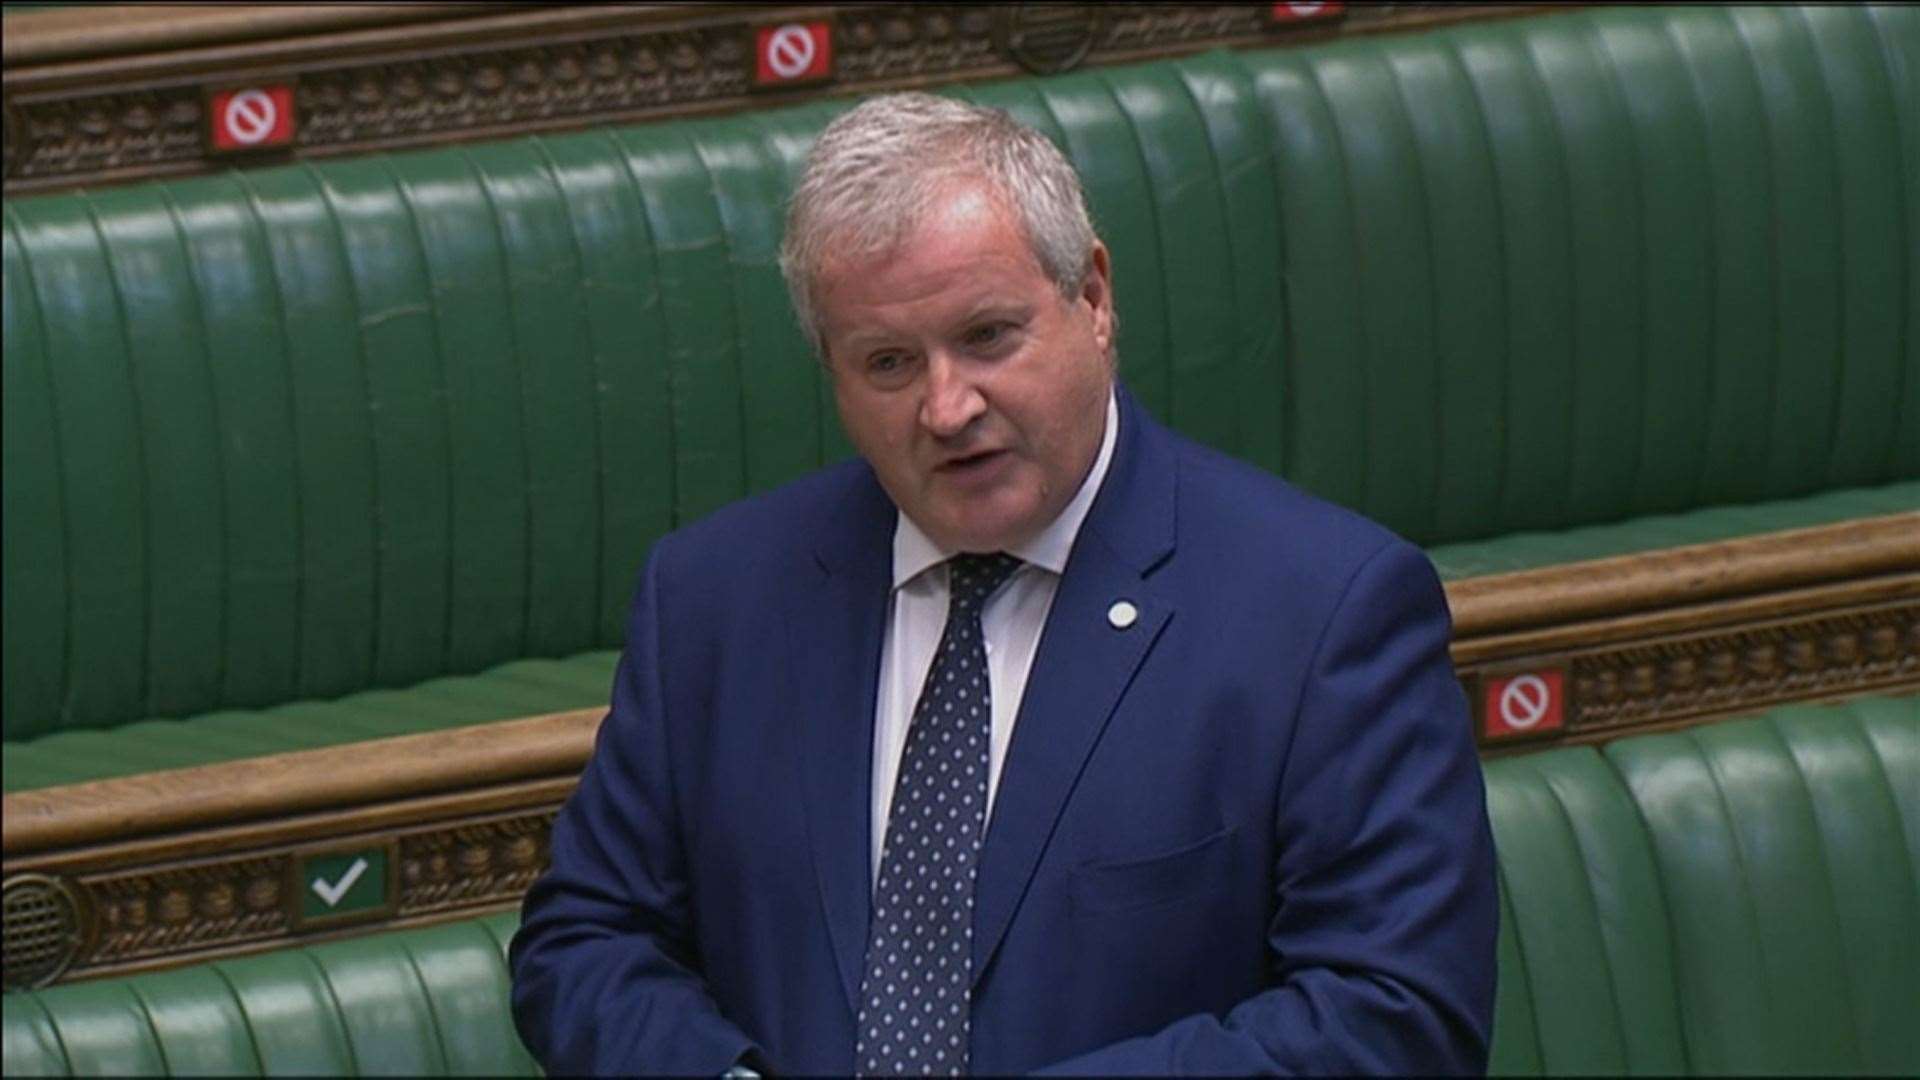 SNP Westminster leader Ian Blackford said the ‘clock was ticking’ for struggling businesses and workers (PA)